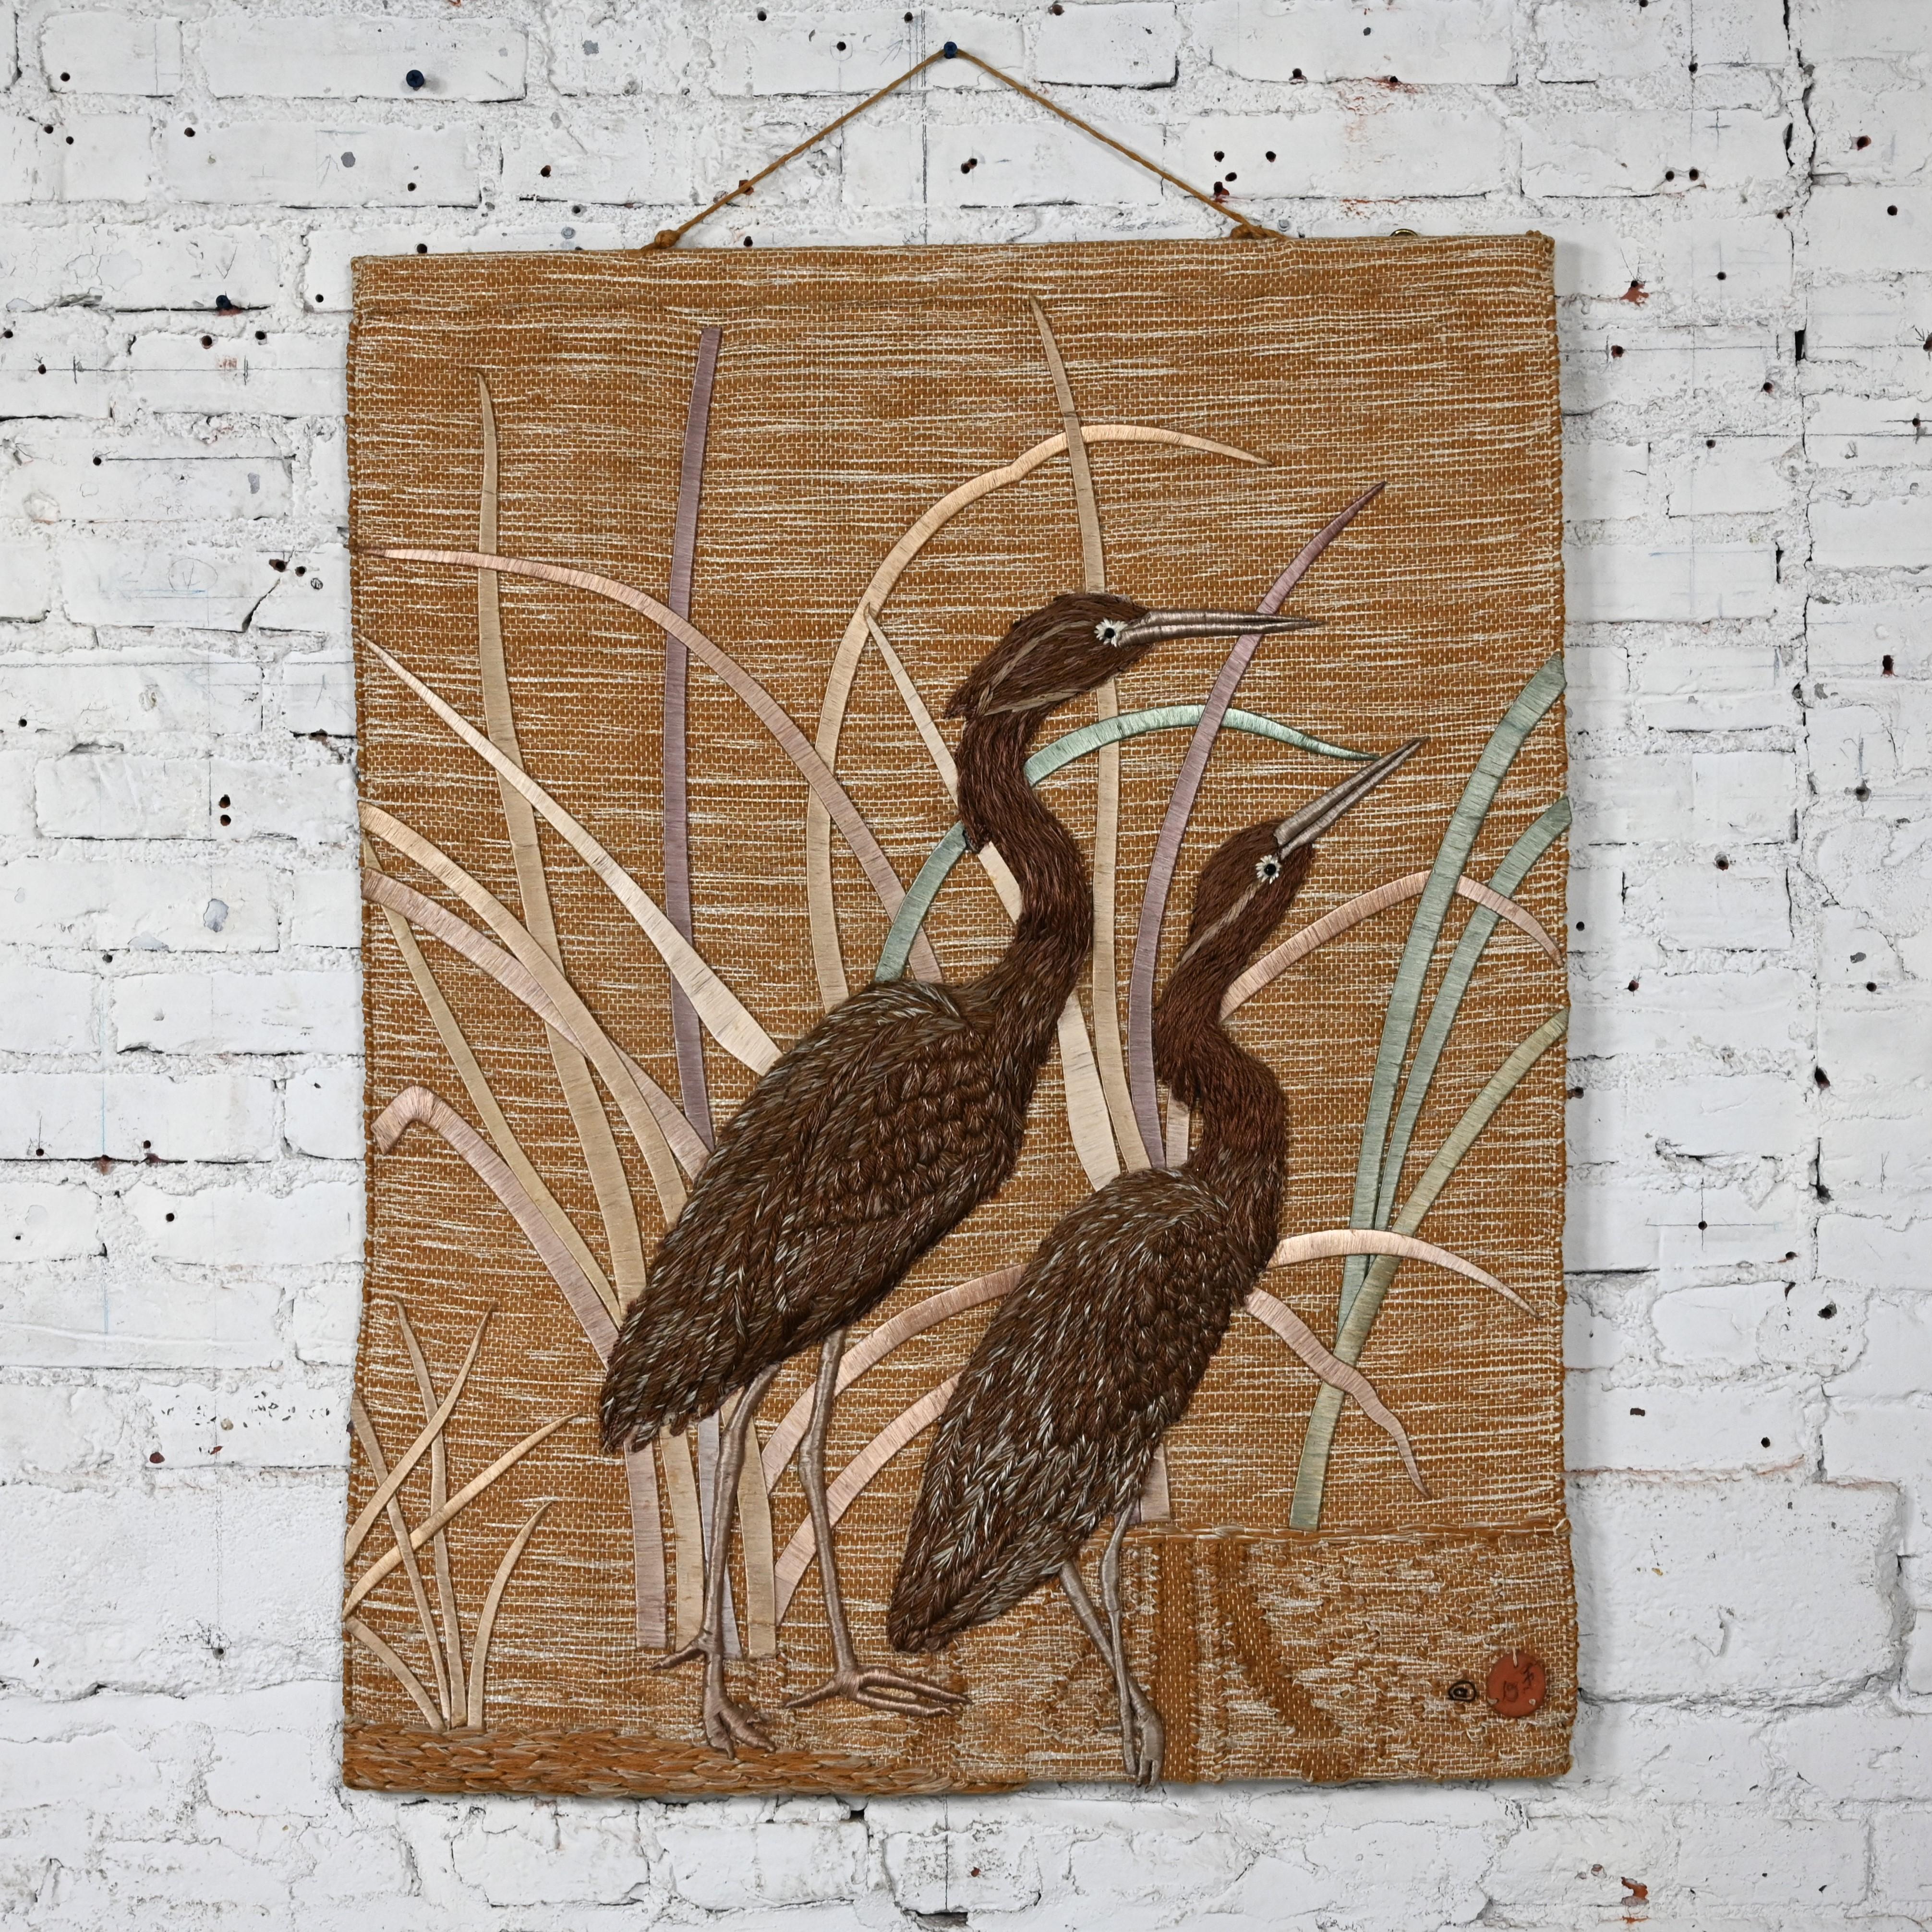 1992 Modern Textile Woven Cranes & Grass Wall Hanging #418 by Don Freedman  For Sale 6